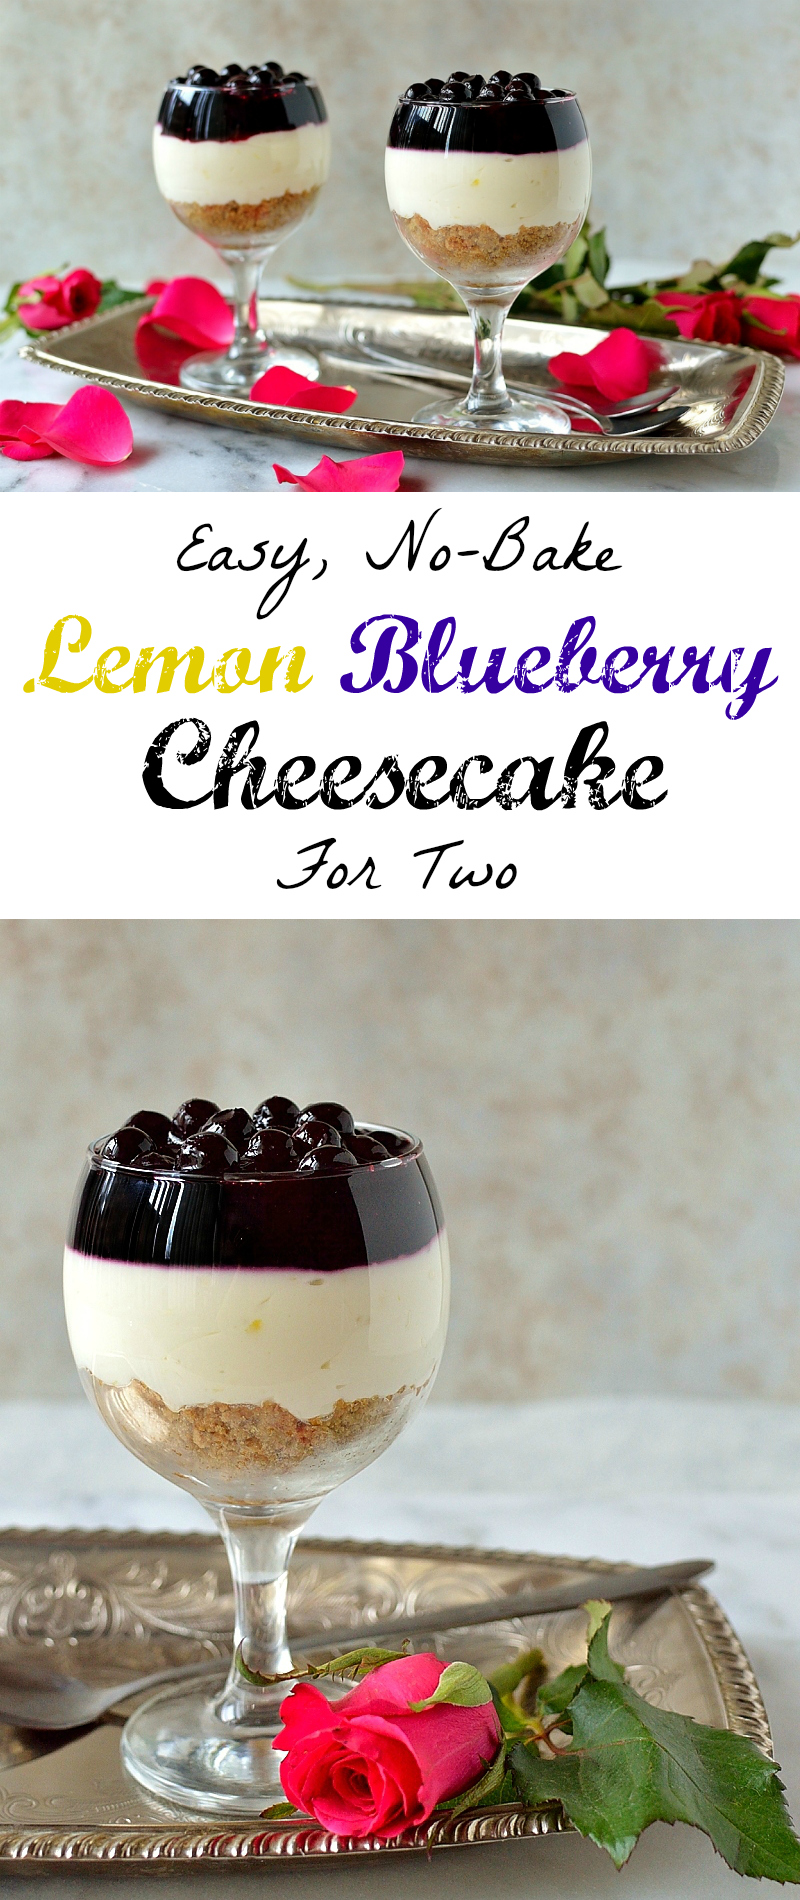 Easy, no bake lemon blueberry cheesecake for two, the perfect dessert for Valentine's Day!